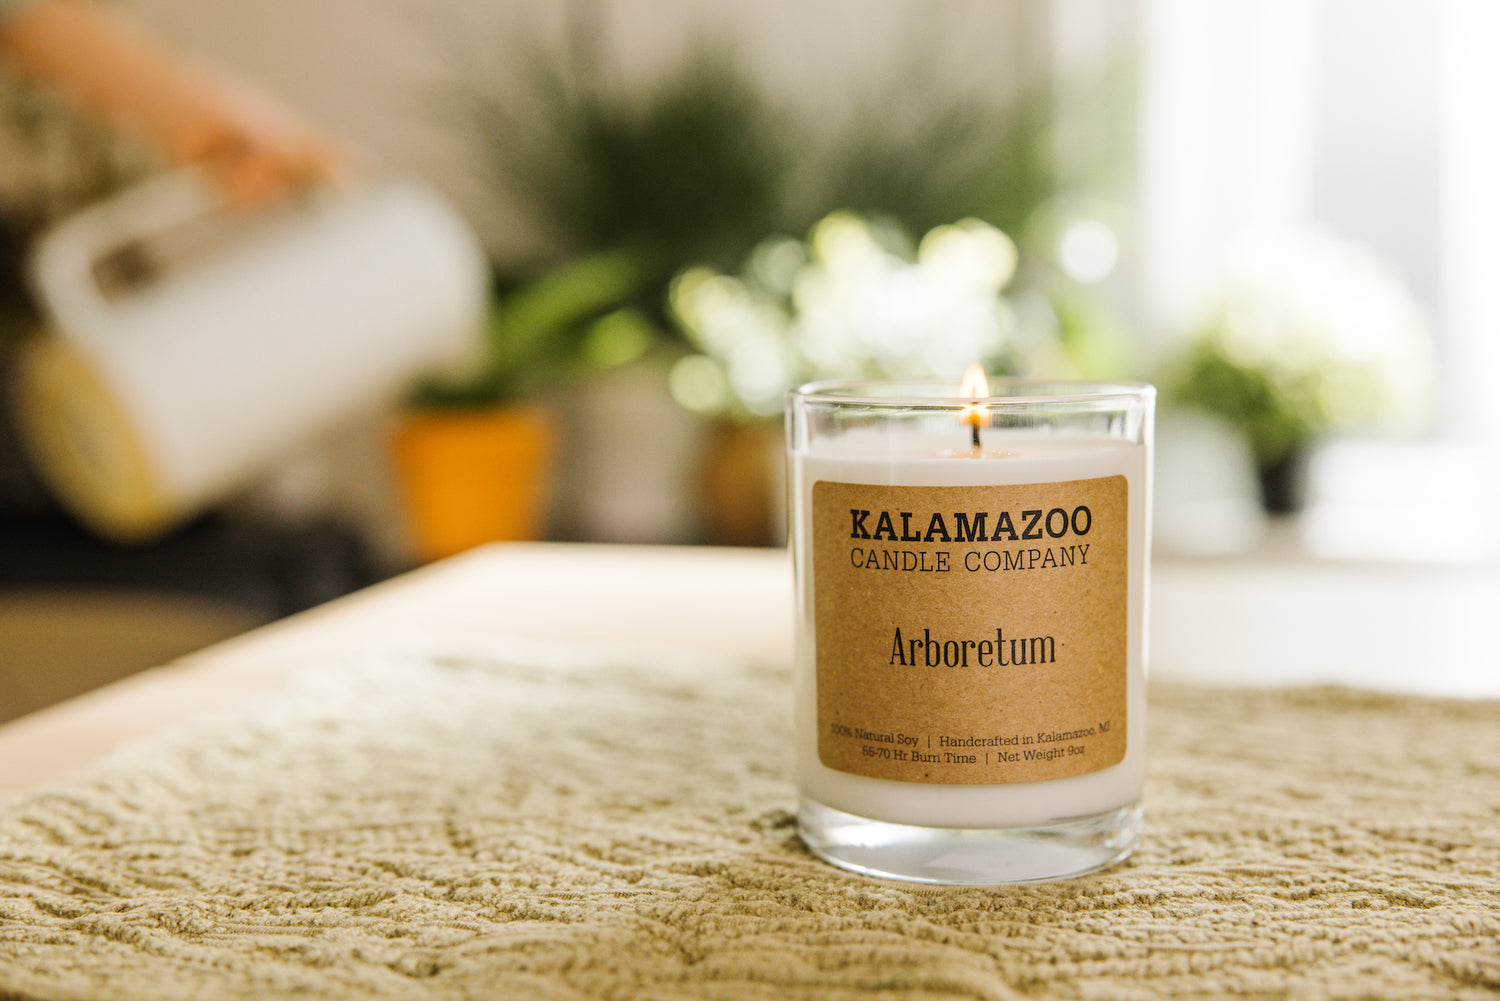 An Arboretum candle with plants